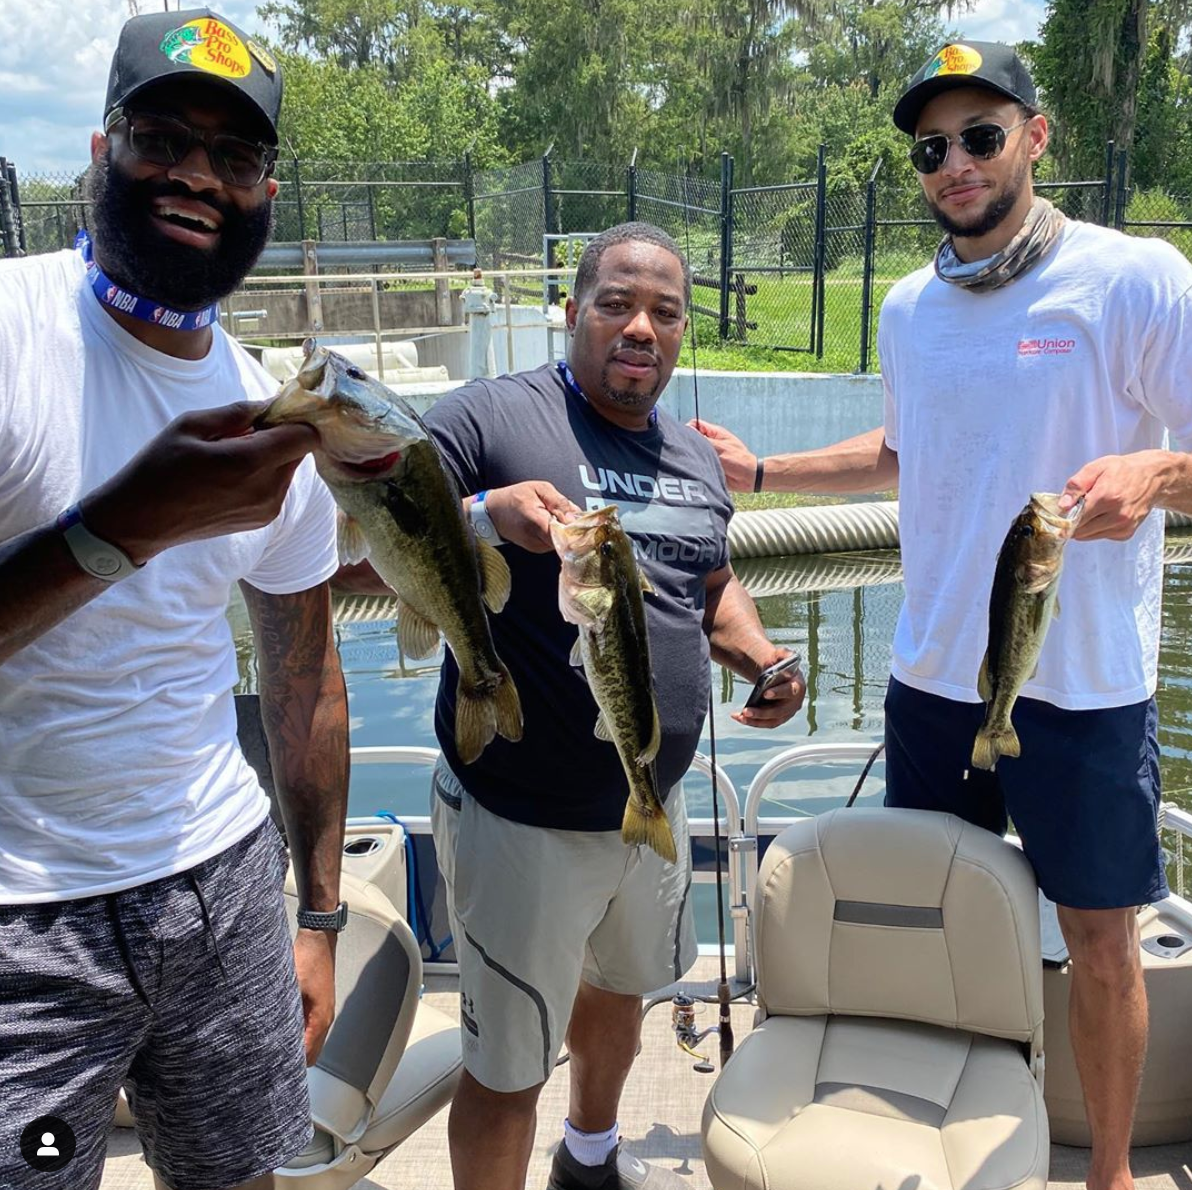 The NBA allegedly stocked the bubble lake with fish, proving